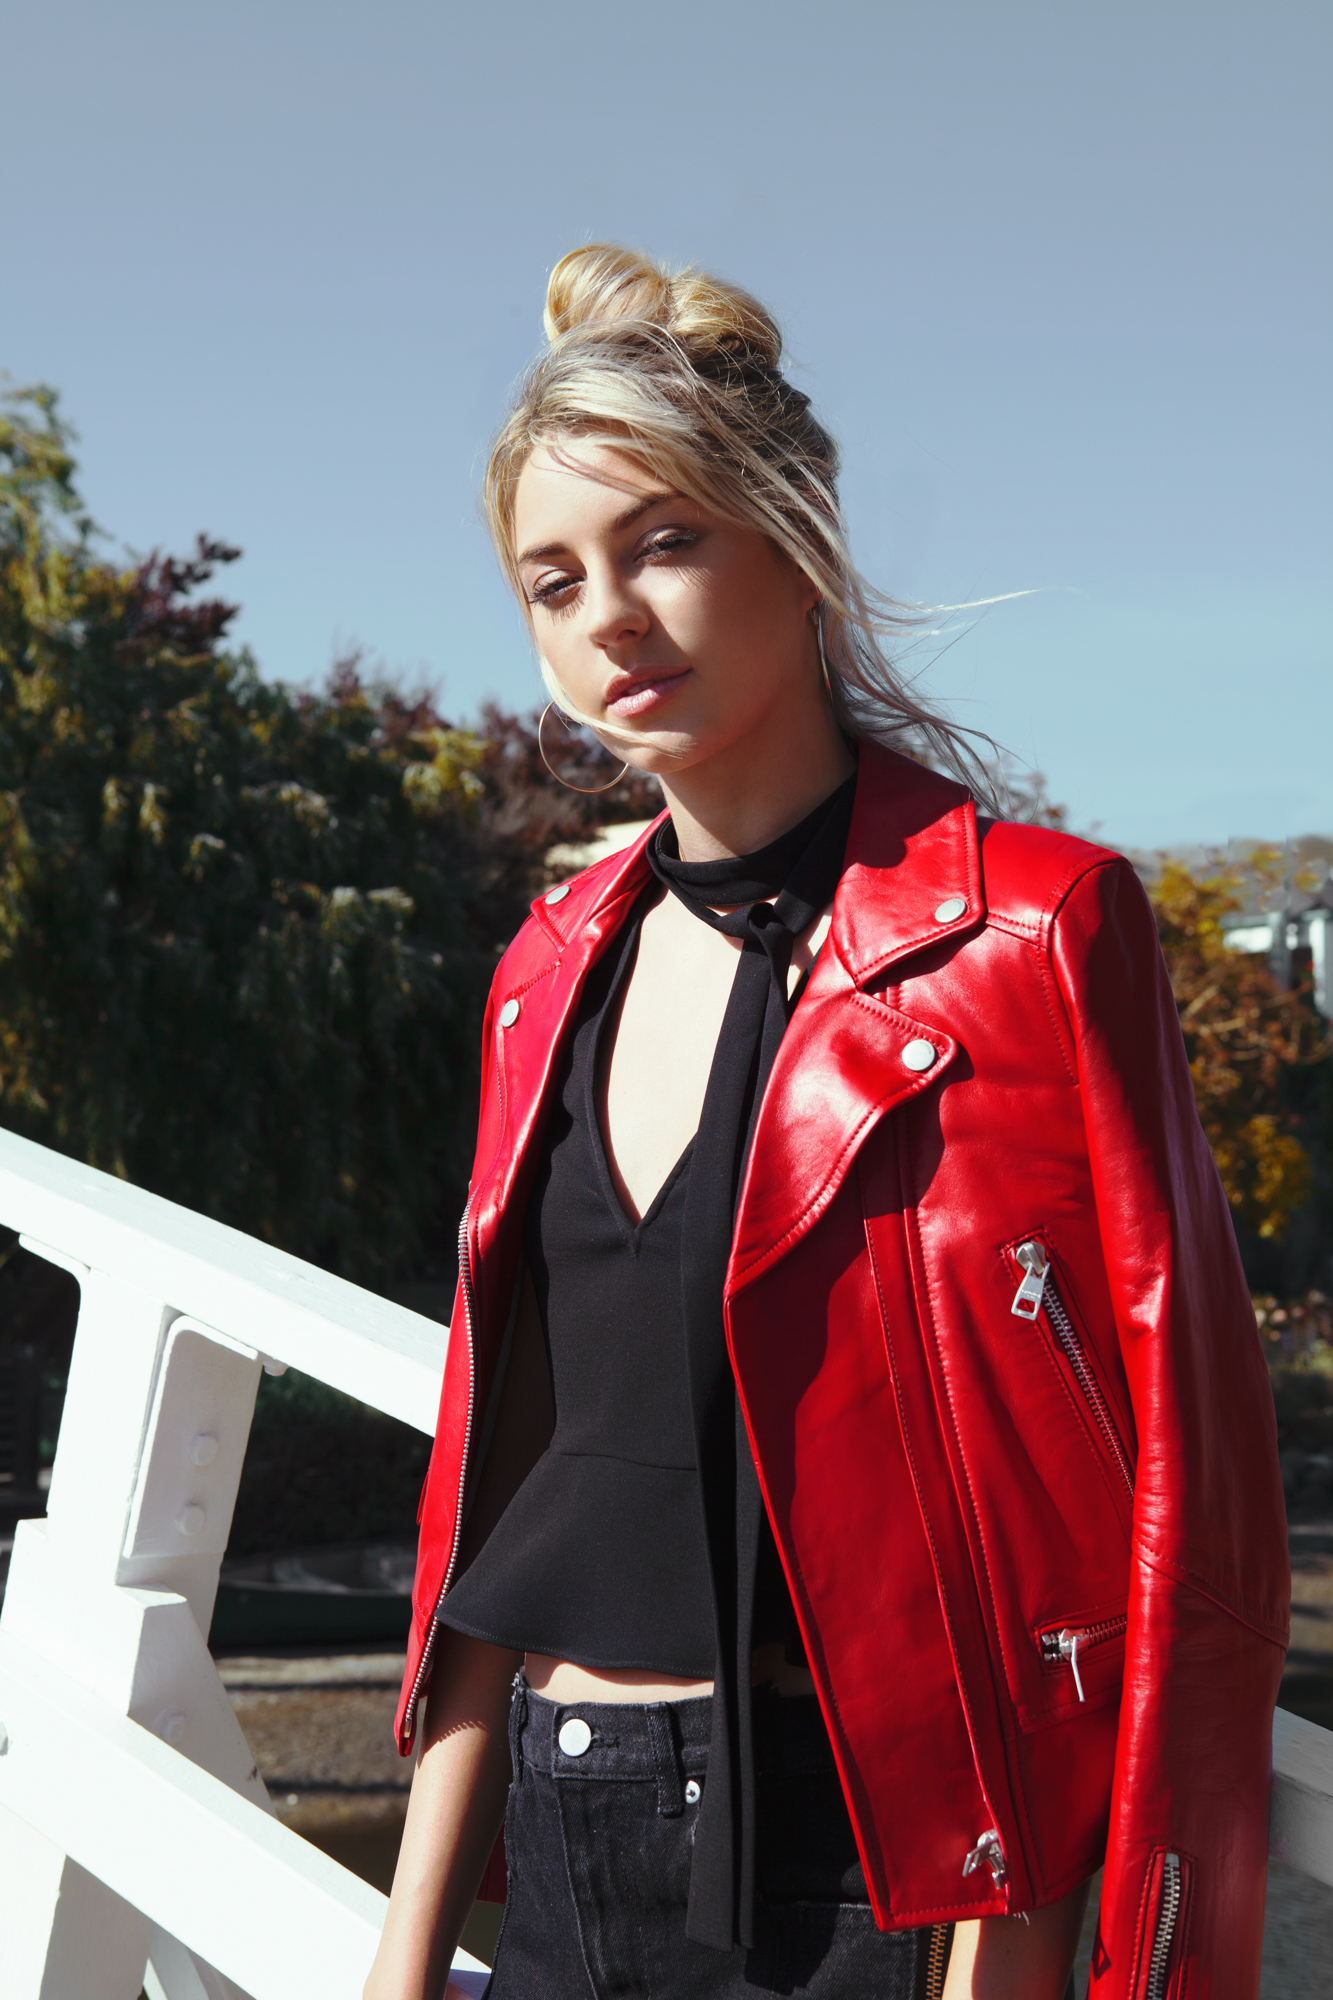 LIKELY's Lettie Top paired with the red leather jacket from Paris-based brand Intuition